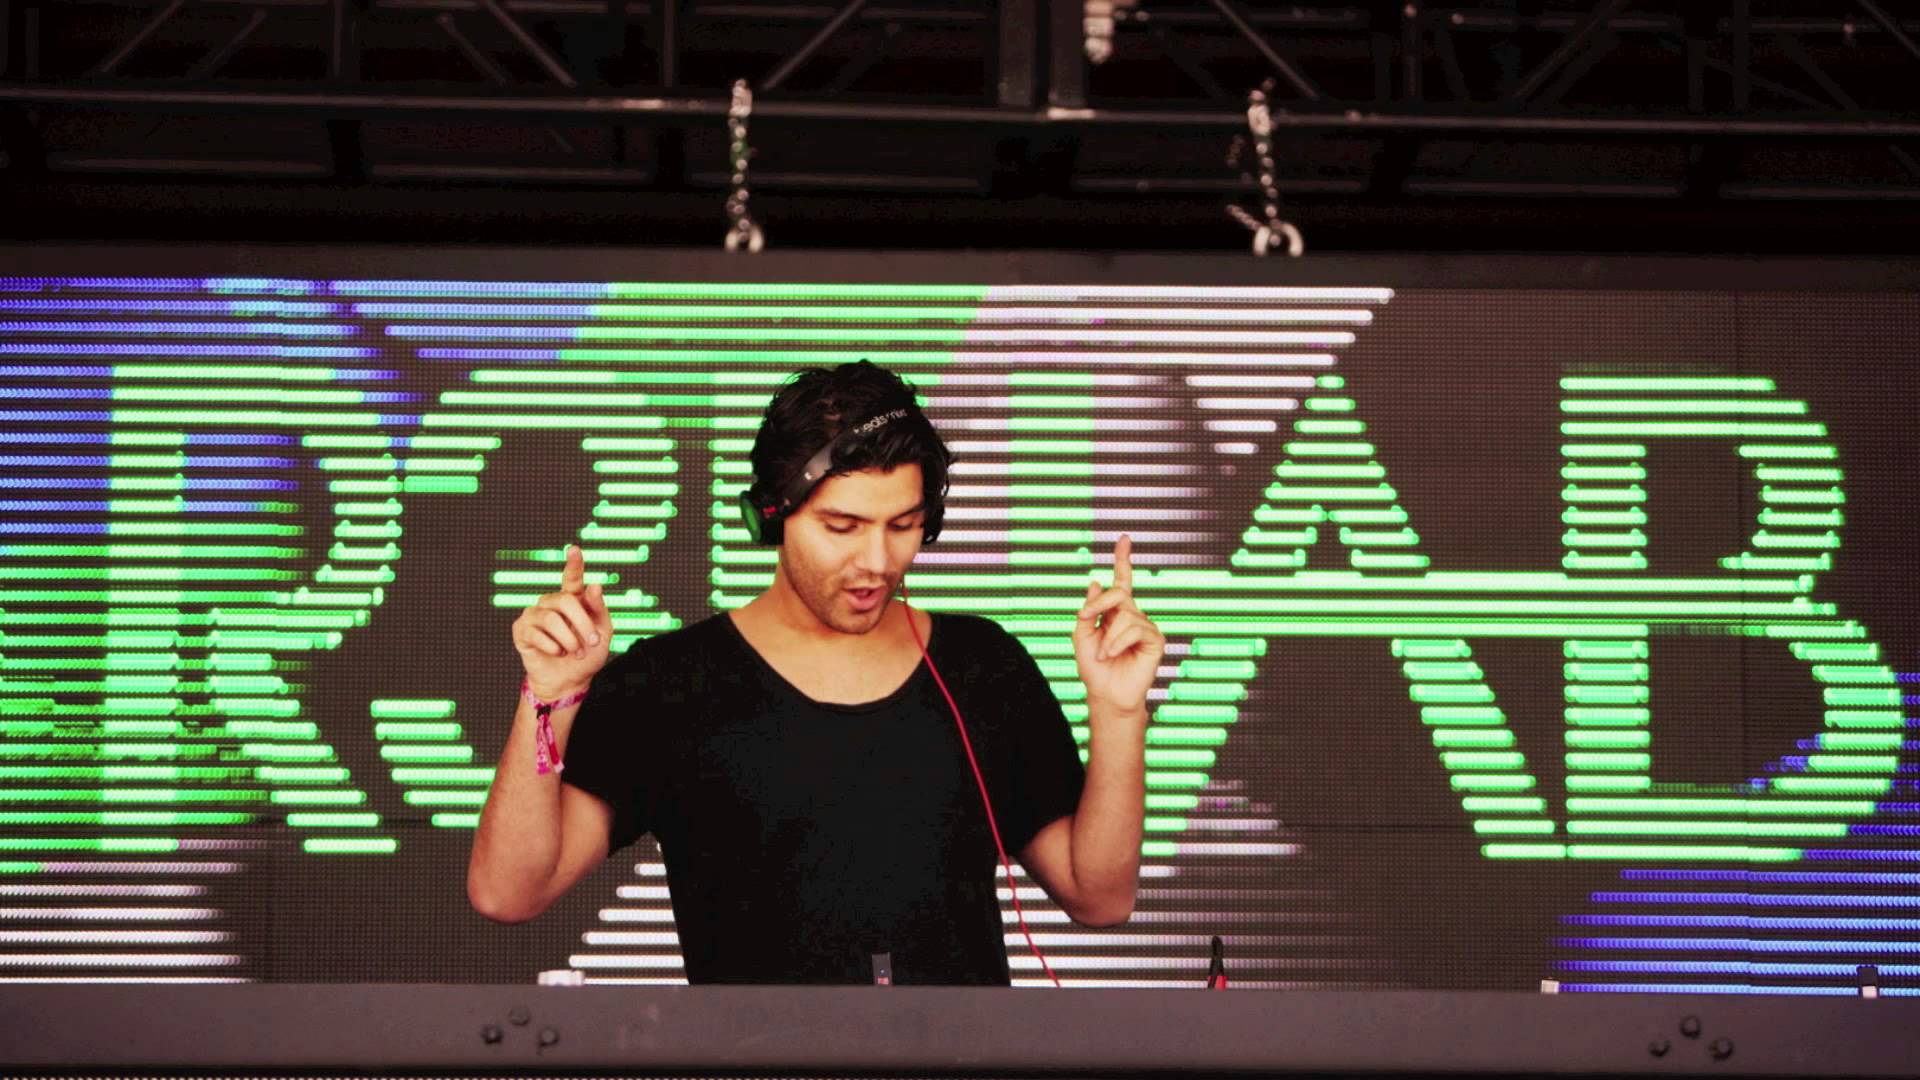 REDESIGN my idea for R3HAB Morocco Top100 23 on Behance